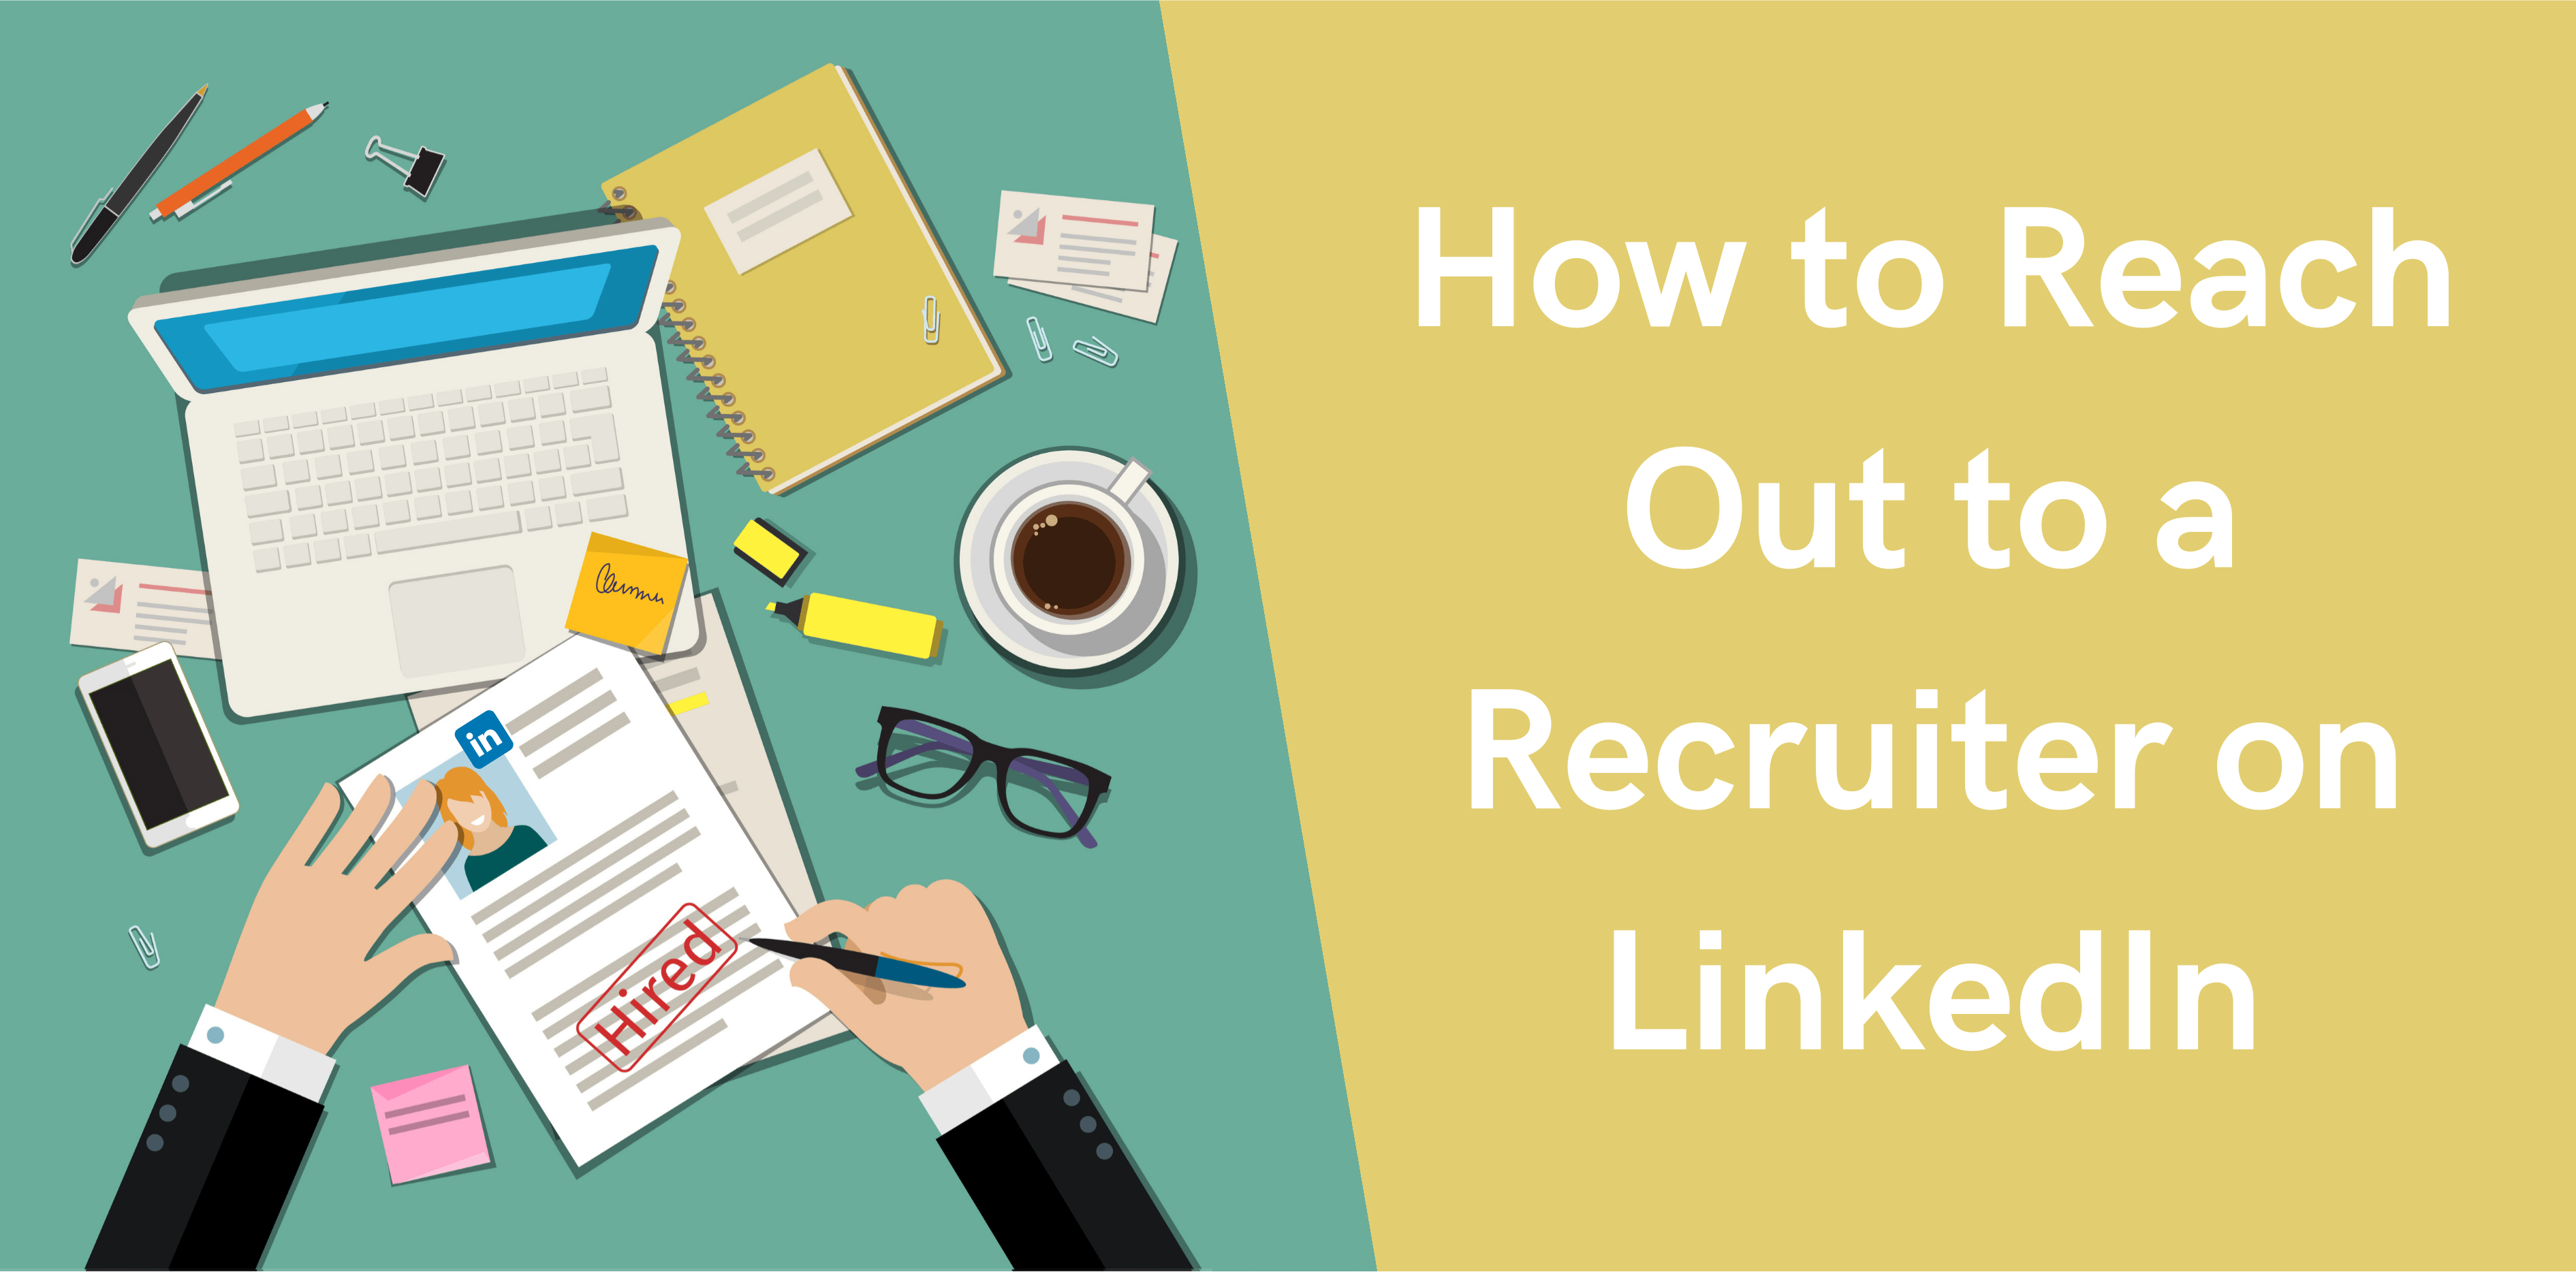 how-to-reach-out-to-a-recruiter-on-linkedin-octopus-crm